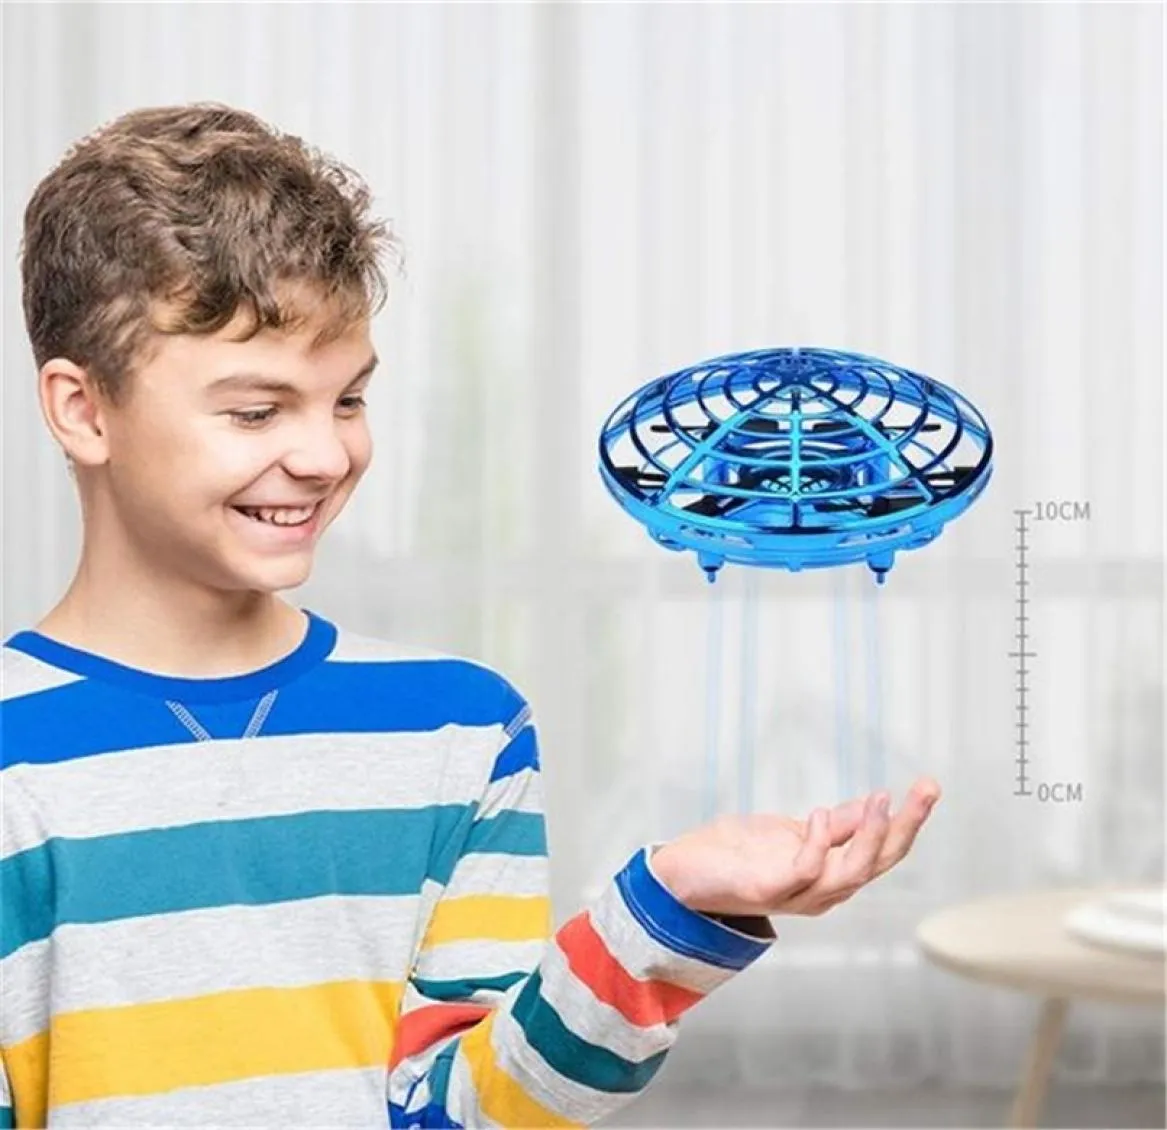 Kakbeir RC Quadcopter Flying Helicopter Magic Hand UFO Ball Aircraft Sensing Mini druction Drone Kids Electric Electronic Toy 2109578239